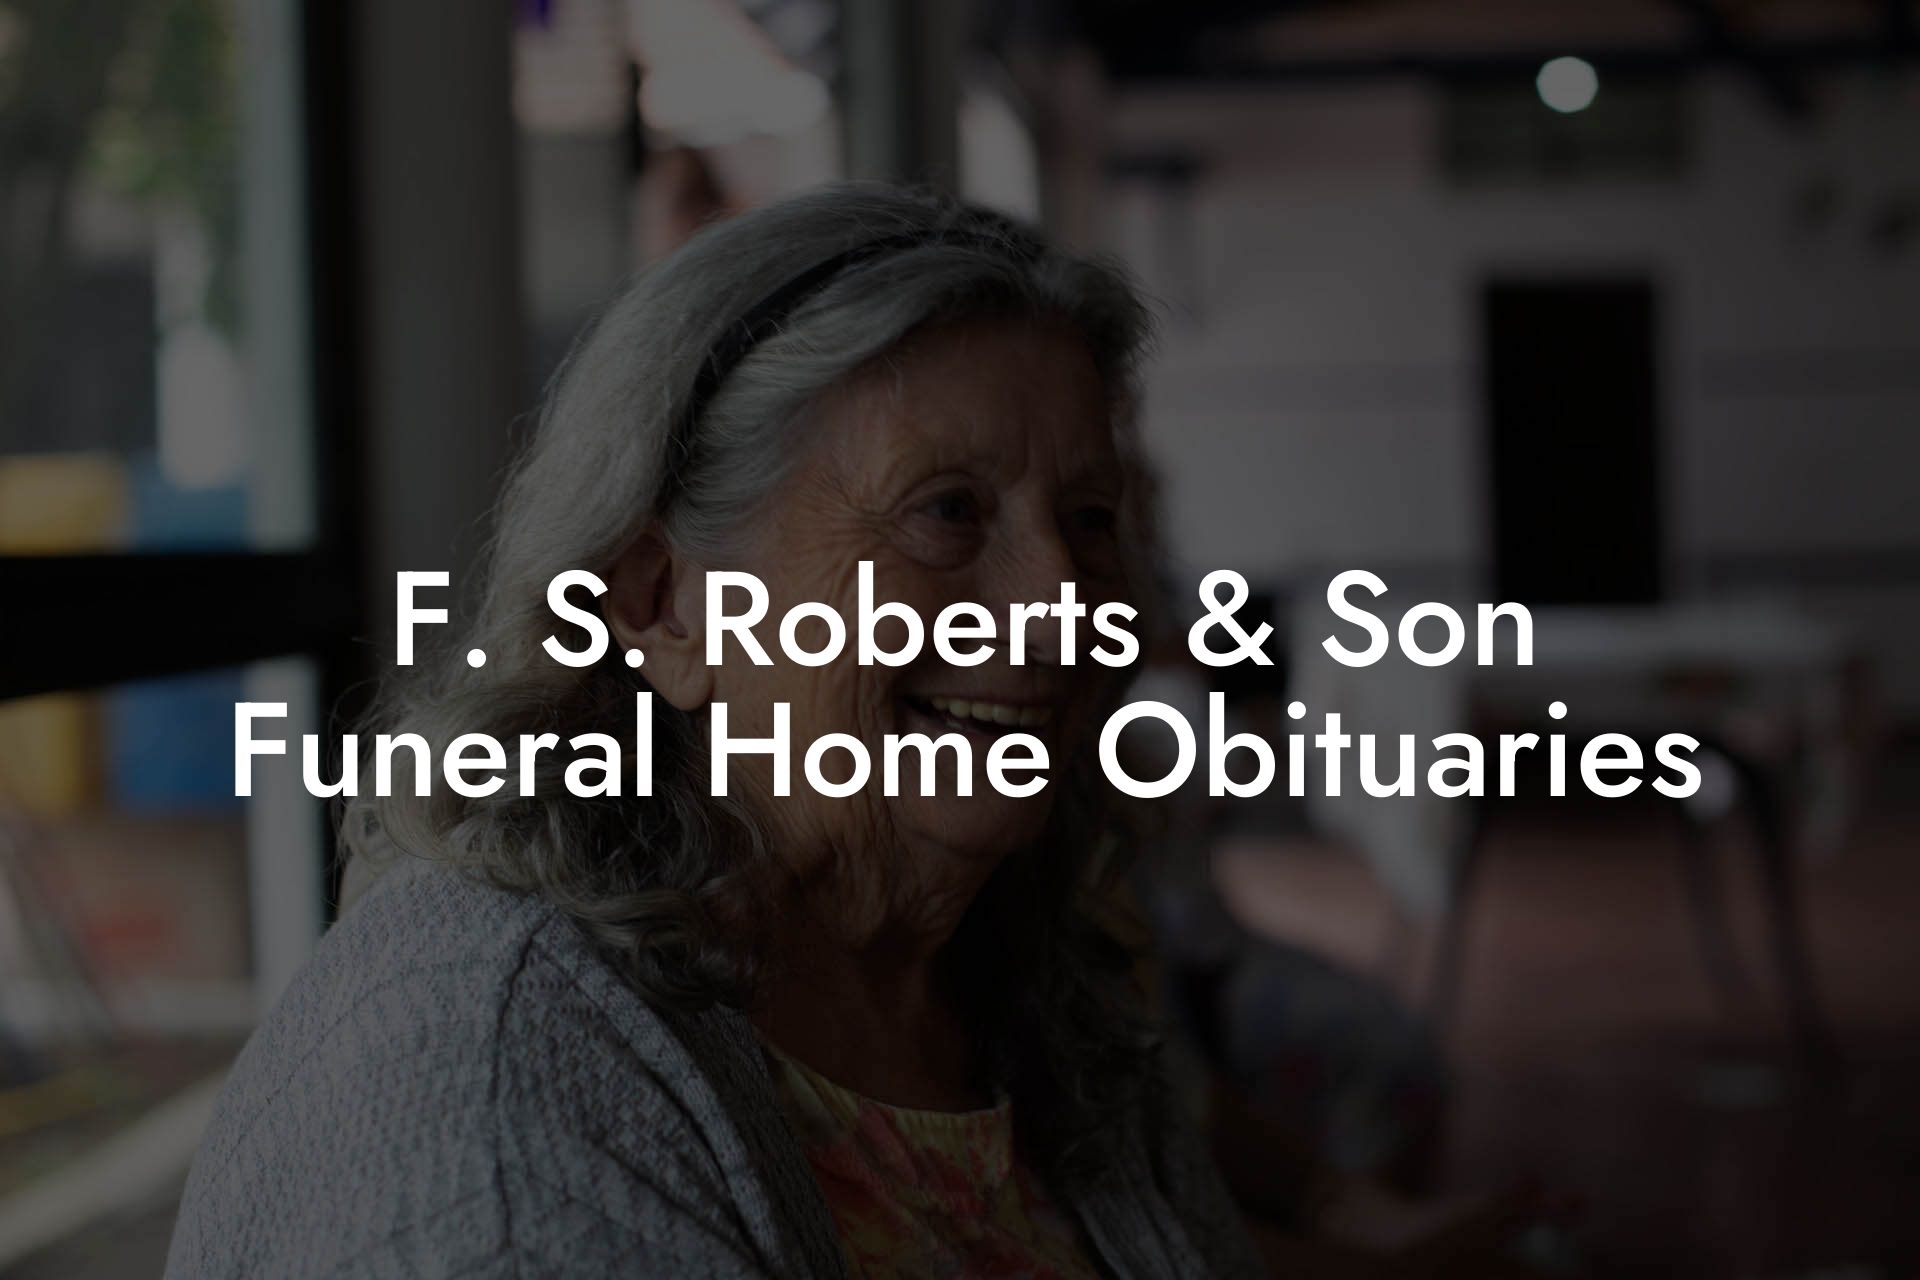 F. S. Roberts & Son Funeral Home Obituaries